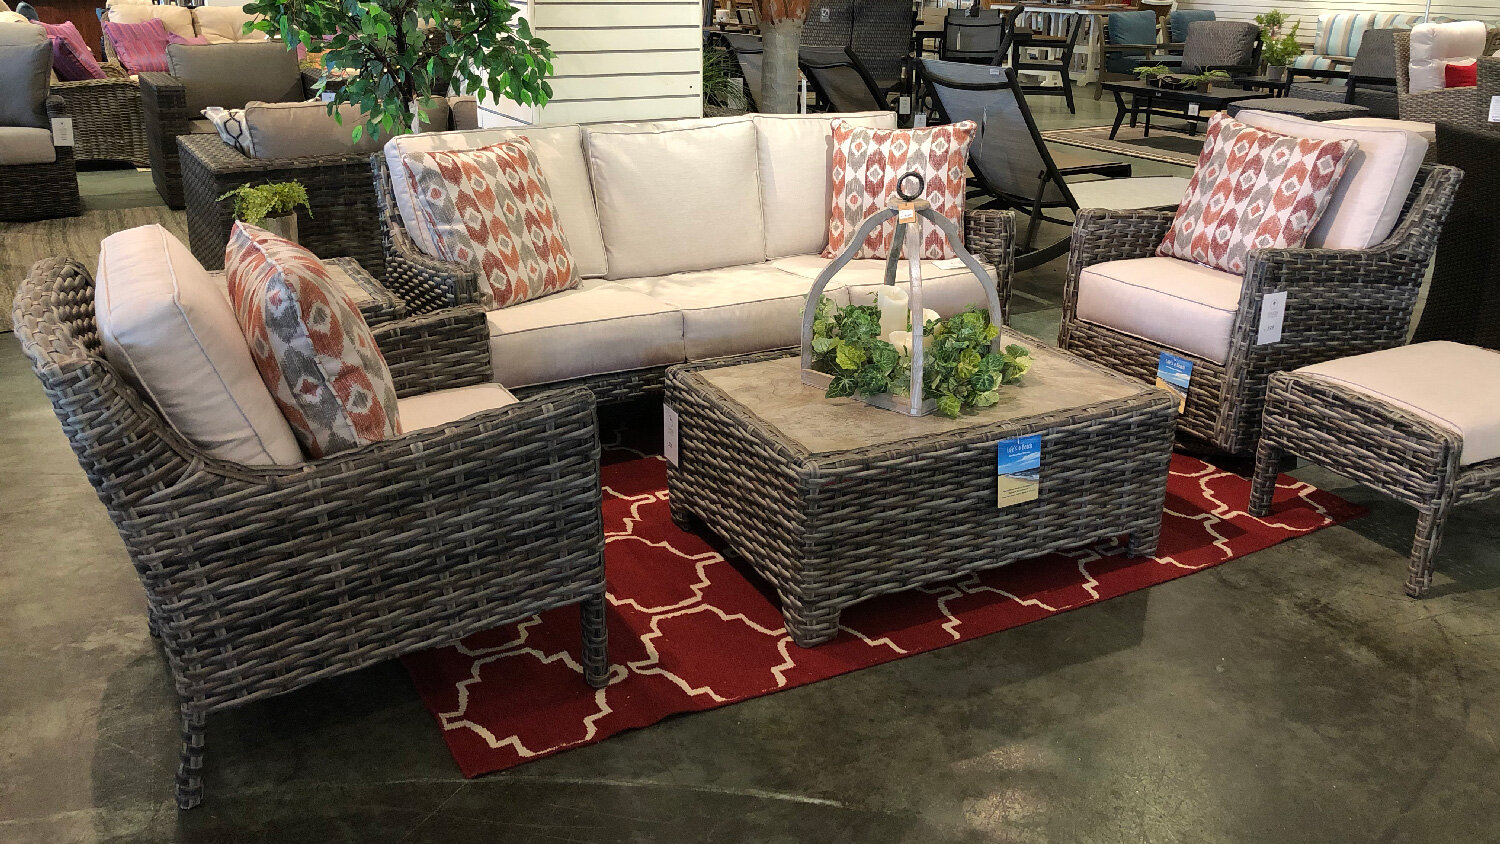 INVERNESS Outdoor Furniture Collection — Oasis Outdoor of Charlotte, NC |  Outdoor, Wicker & Patio Furniture, Hot Tubs, Big Green Egg Grills